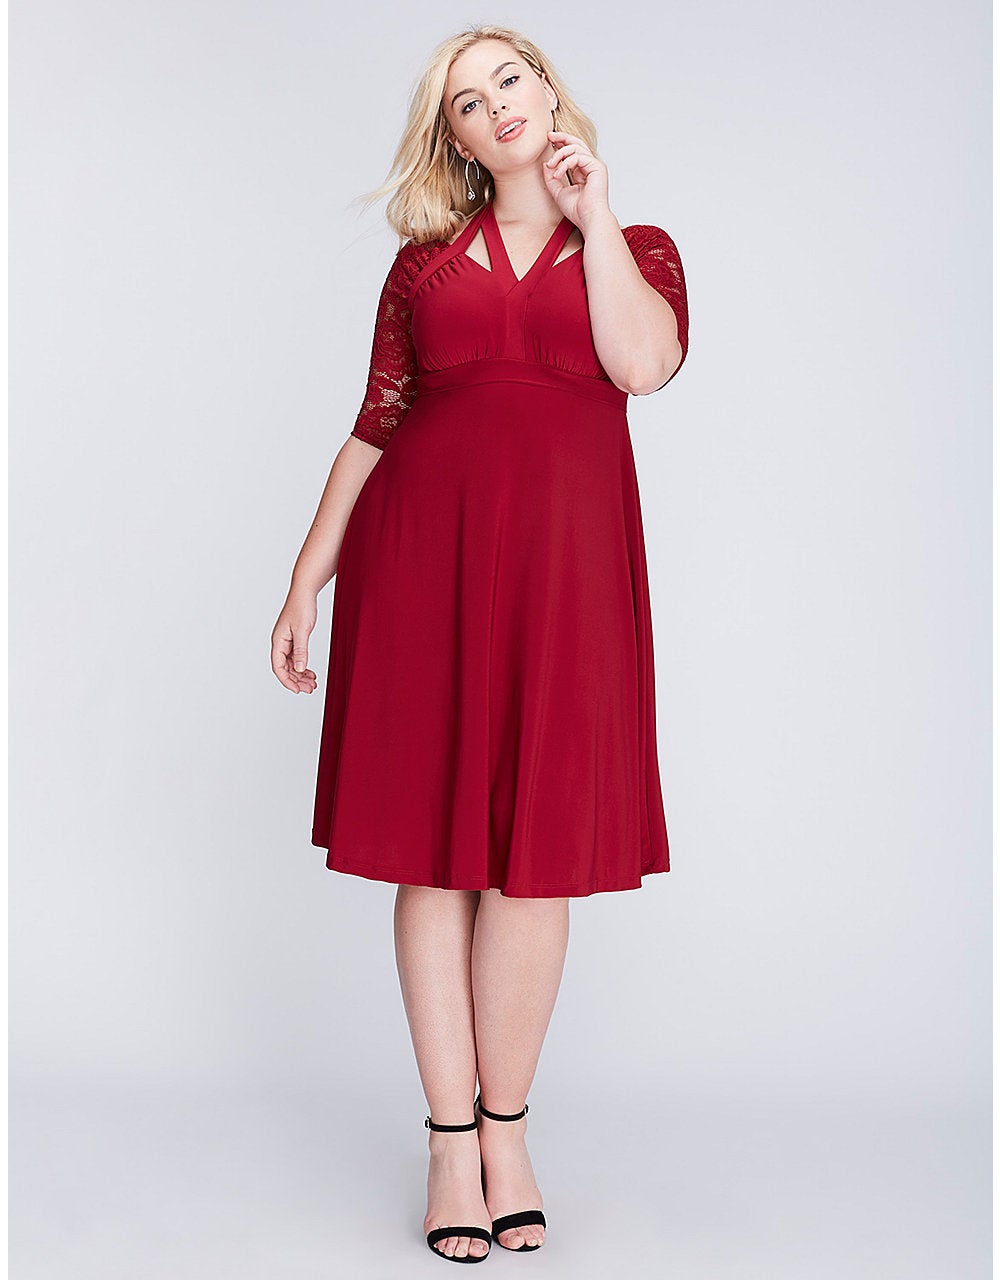 The Best Red Dresses for Valentines Day - Essence